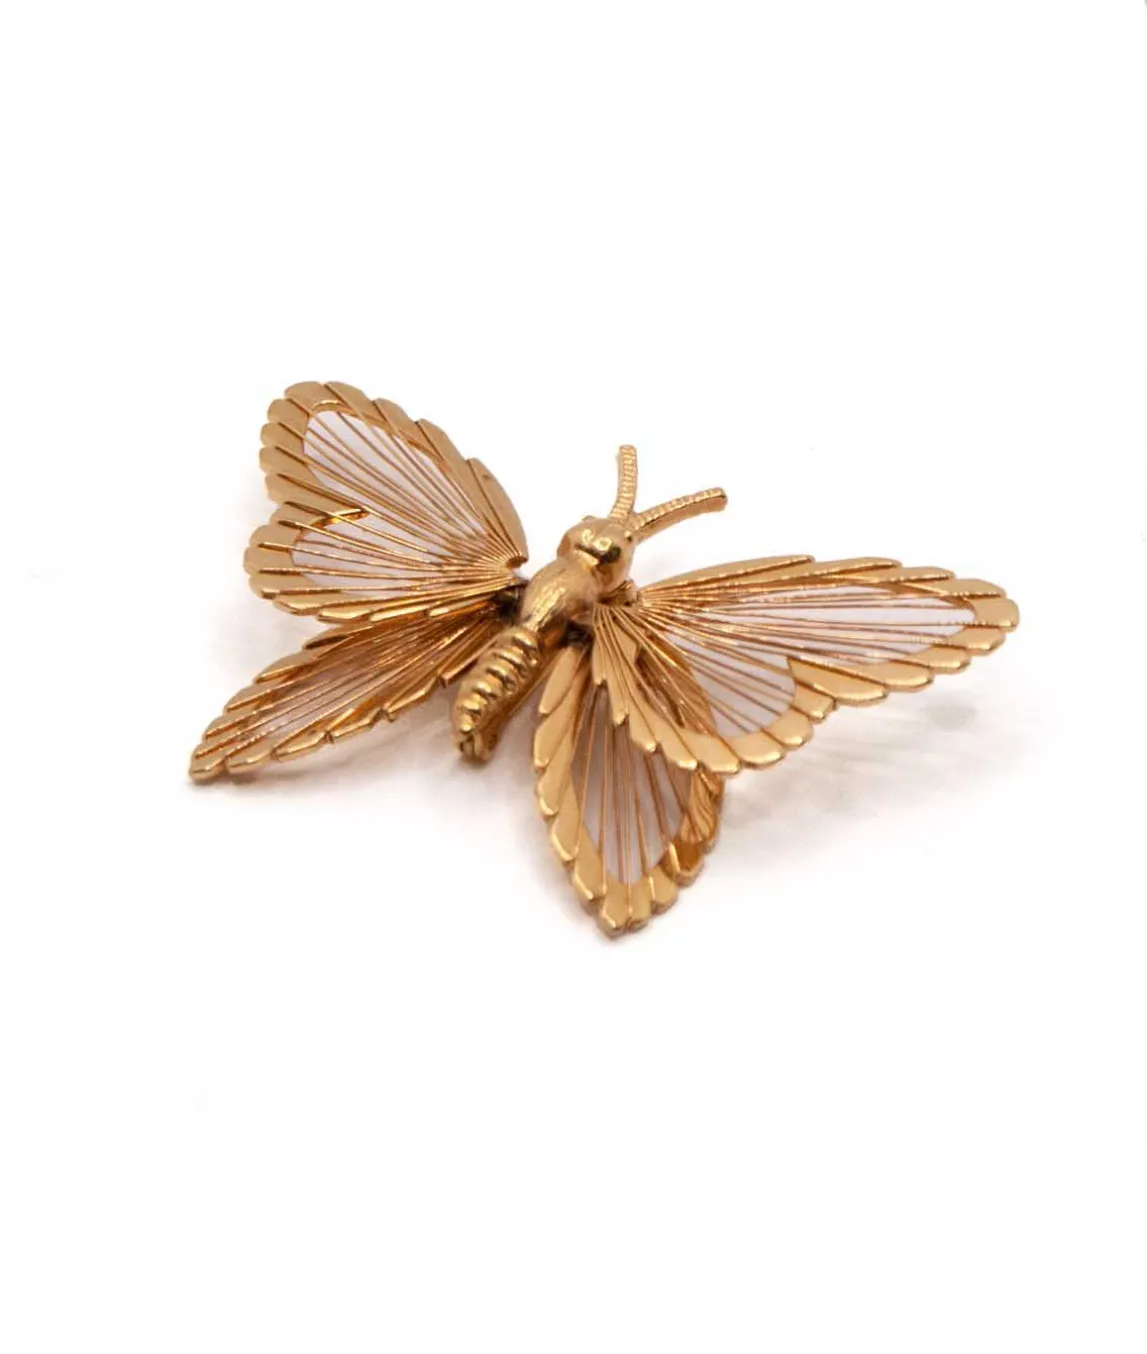 Monet Butterfly Pin Vintage Monet Butterfly Jewelry Signed 